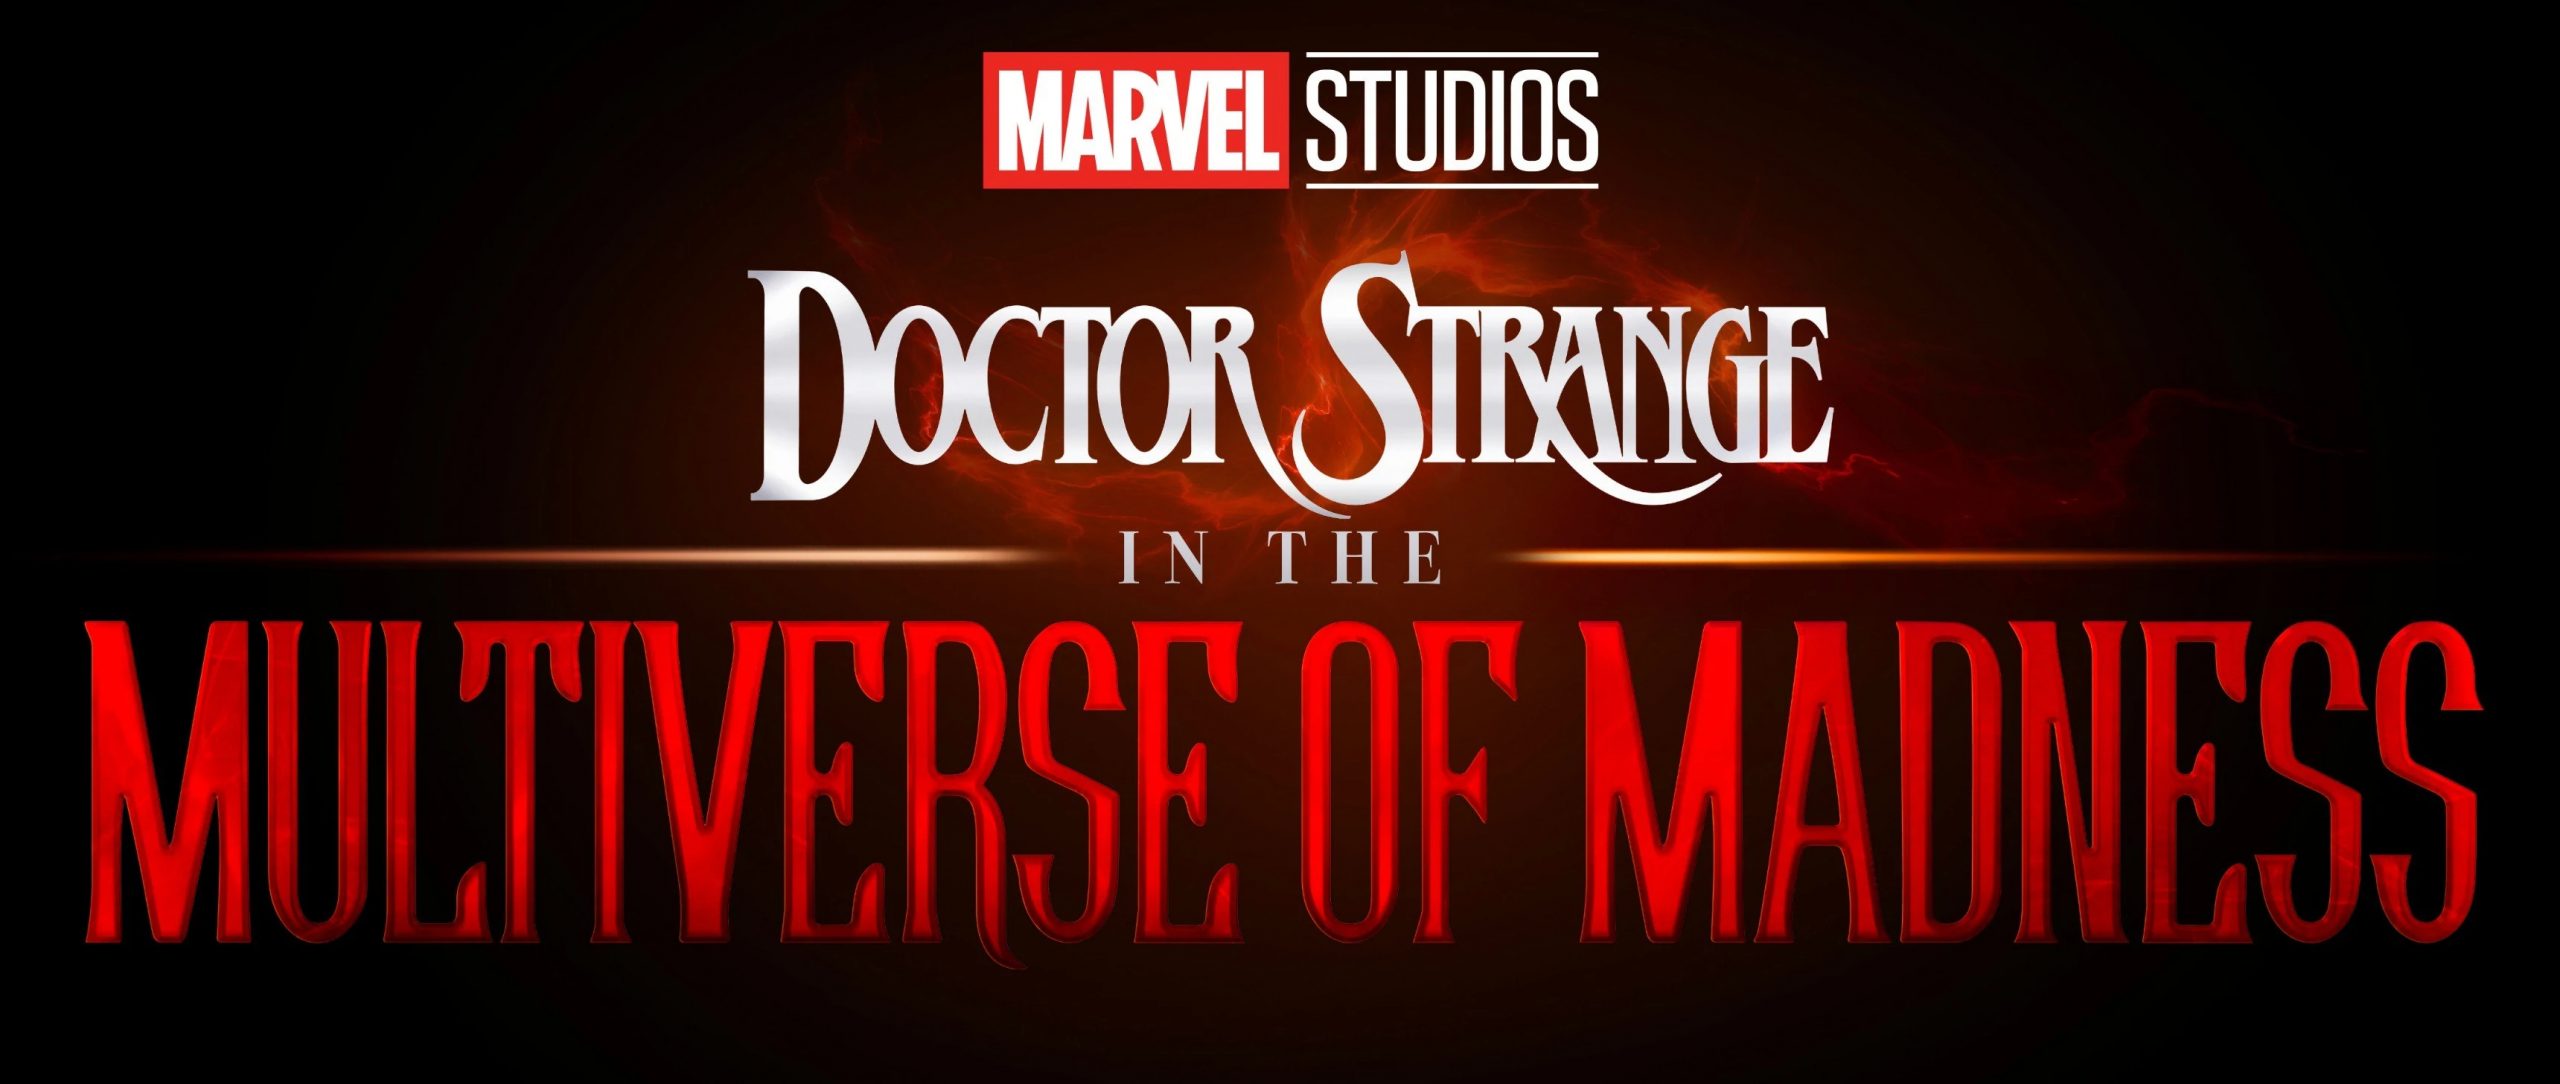 Why Sam Raimi Returned To Marvel For Multiverse Of Madness